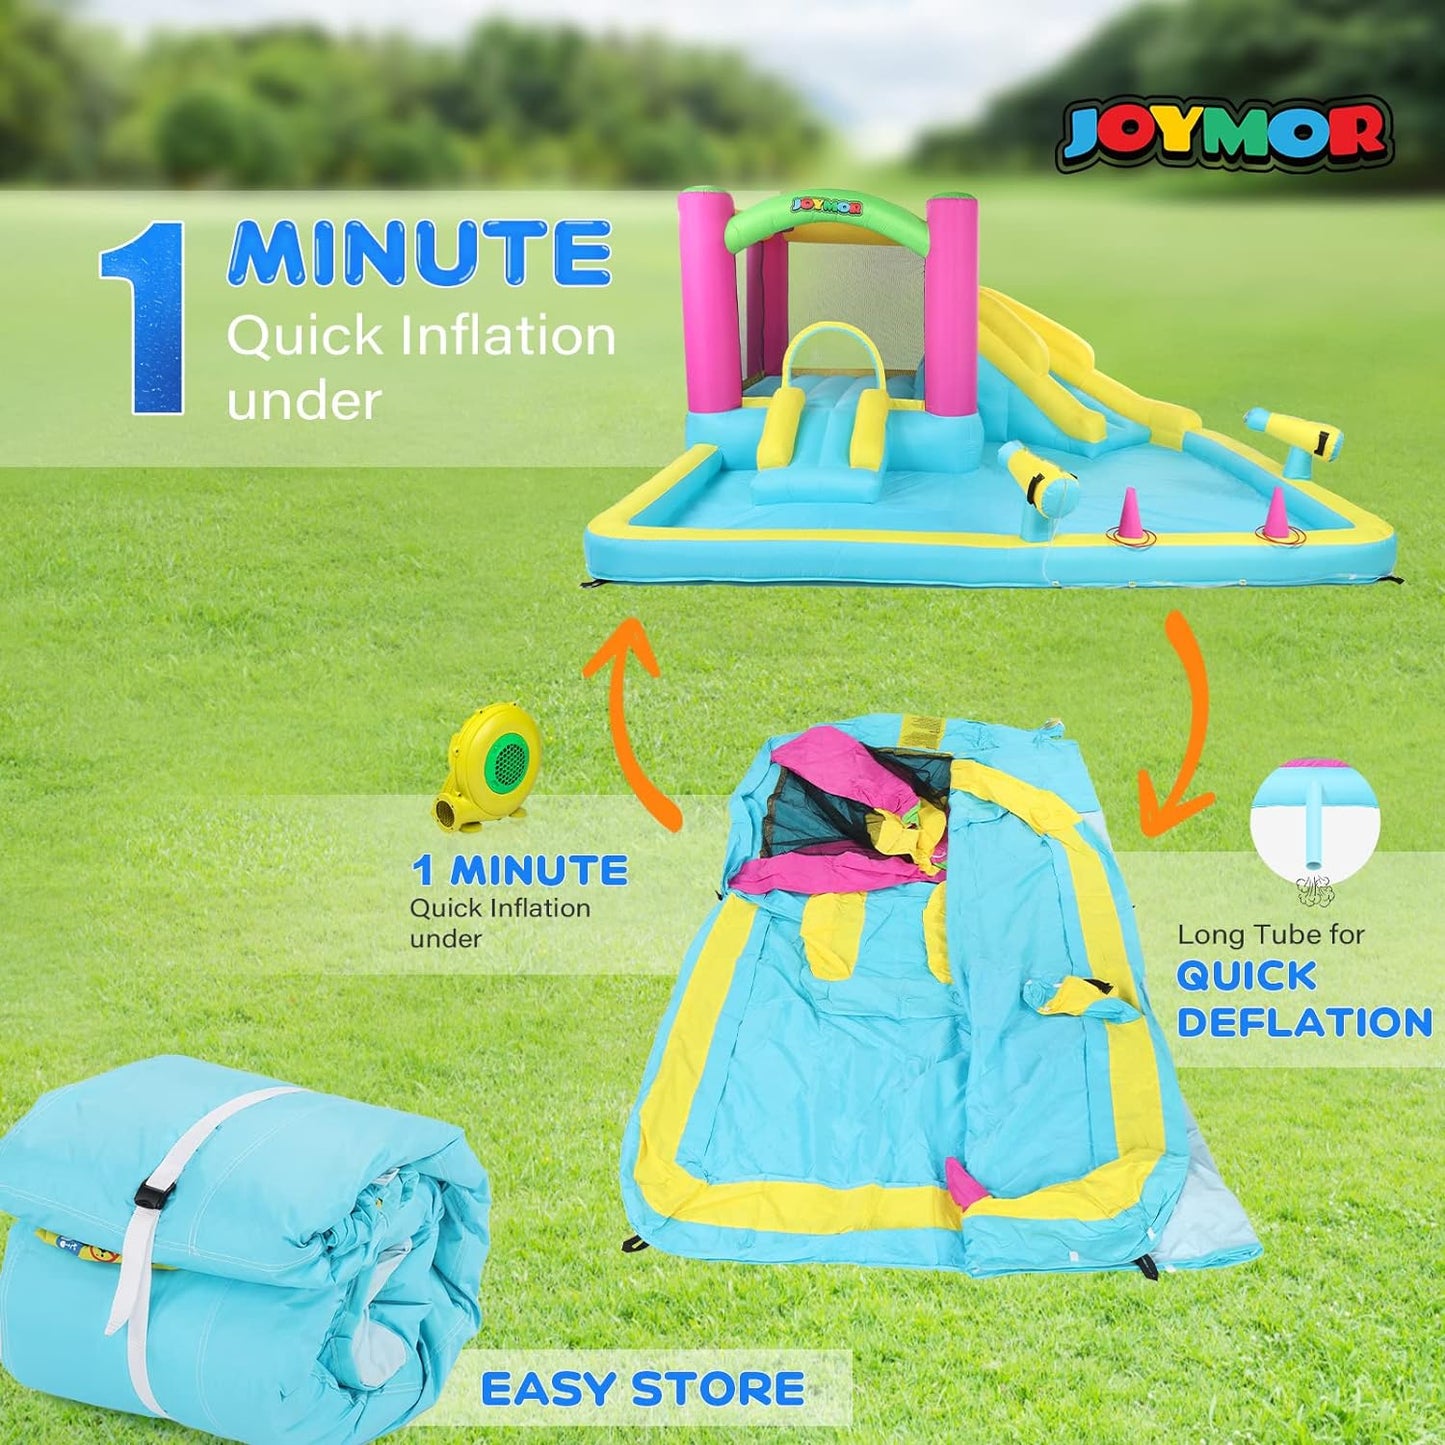 Inflatable Bounce House with Double Water Slide for Kids Toddler Age 3-10, Splash Pool Water Guns Ring-Toss Game for Outdoor Backyard Fun Water Toys Indoor Bouncy Castle with Air Blower